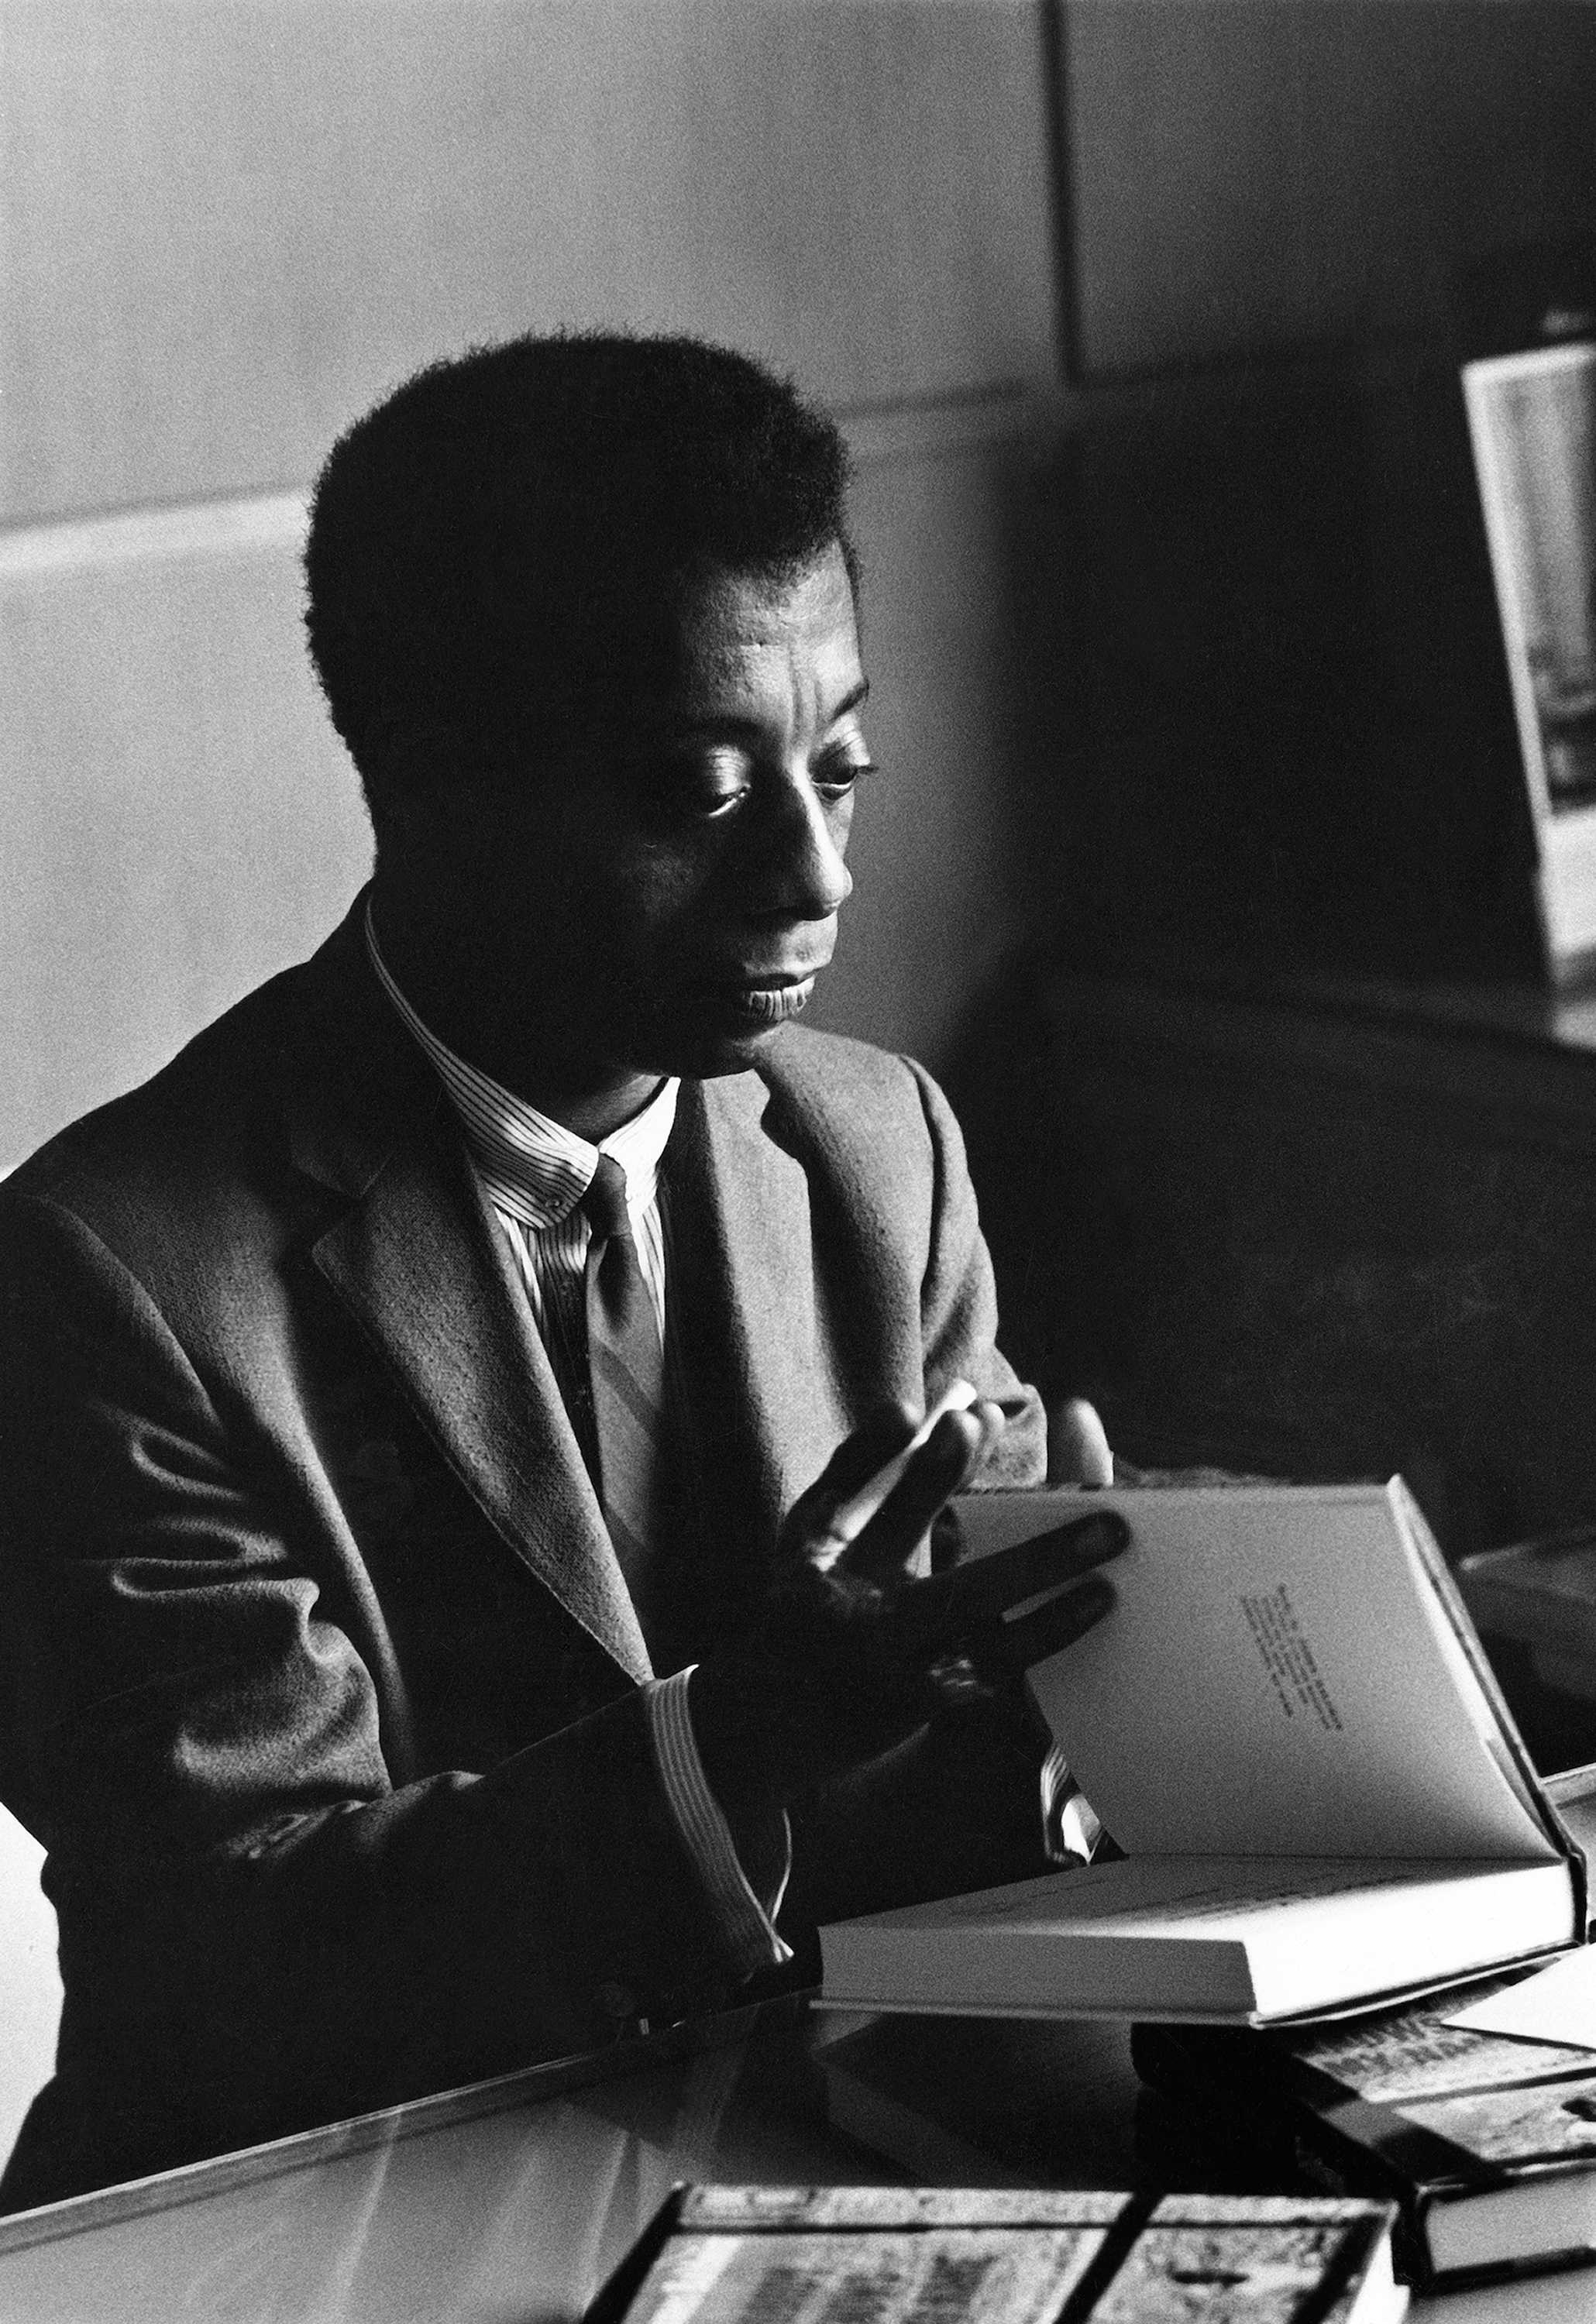 Black and white photograph of James Baldwin seated with a book in his hands